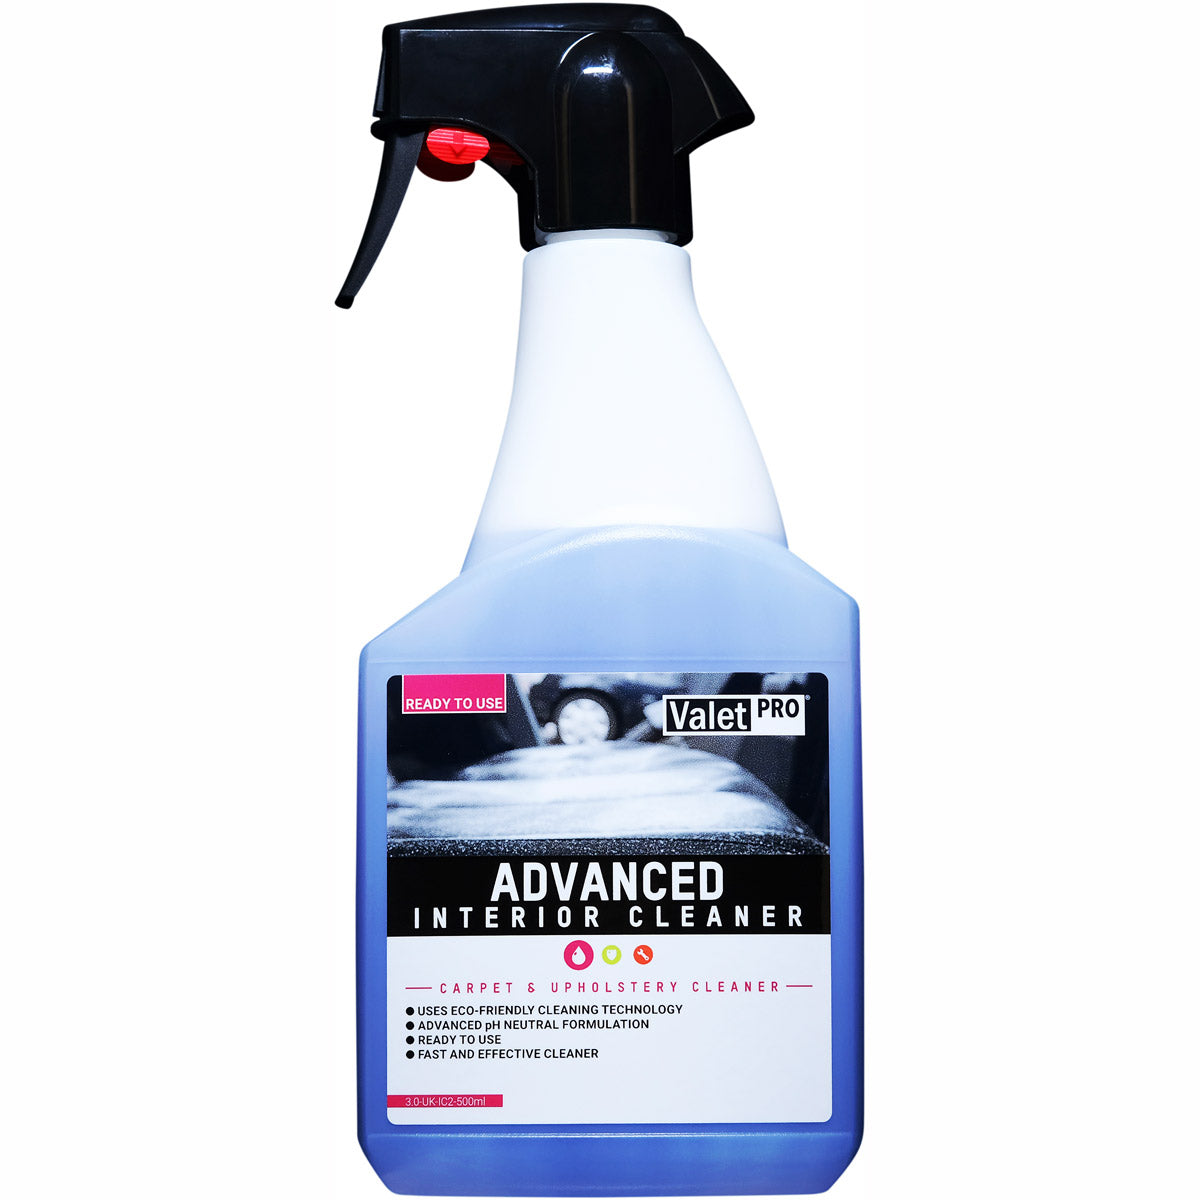 ValetPRO Carpet & Upholstery Advanced Cleaner - 500ml Spray Ready-to-Use